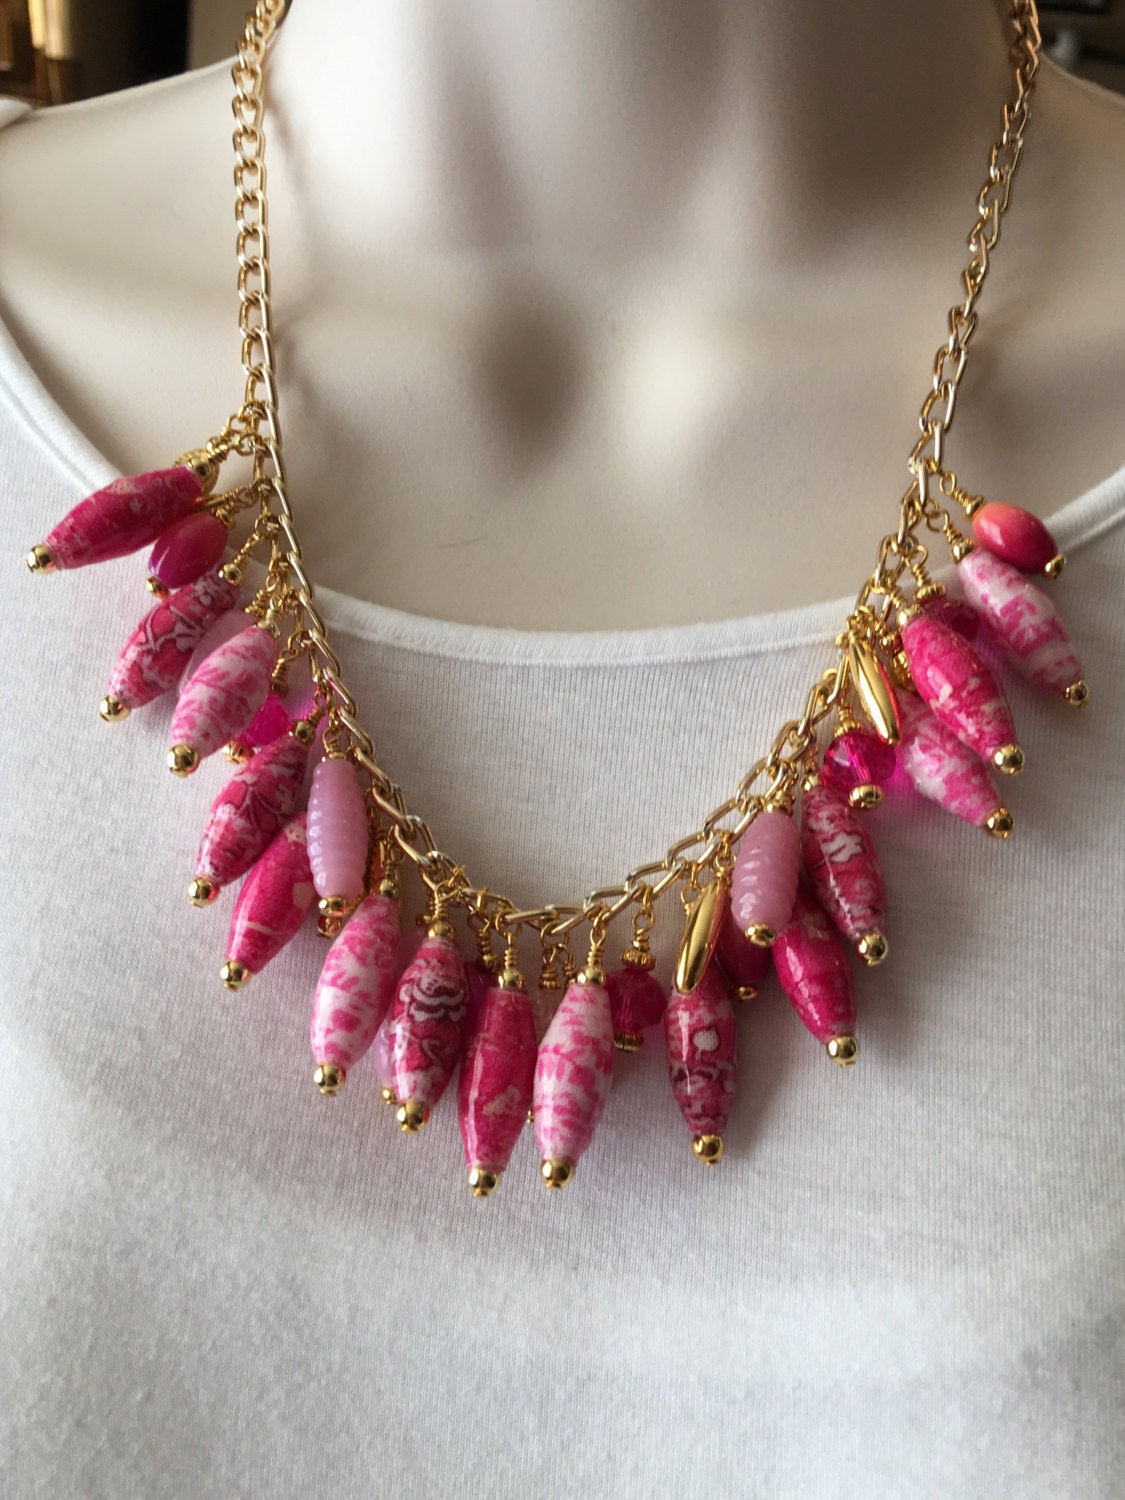 Graduated Shades of Pink Necklace & Earrings Set - Etsy